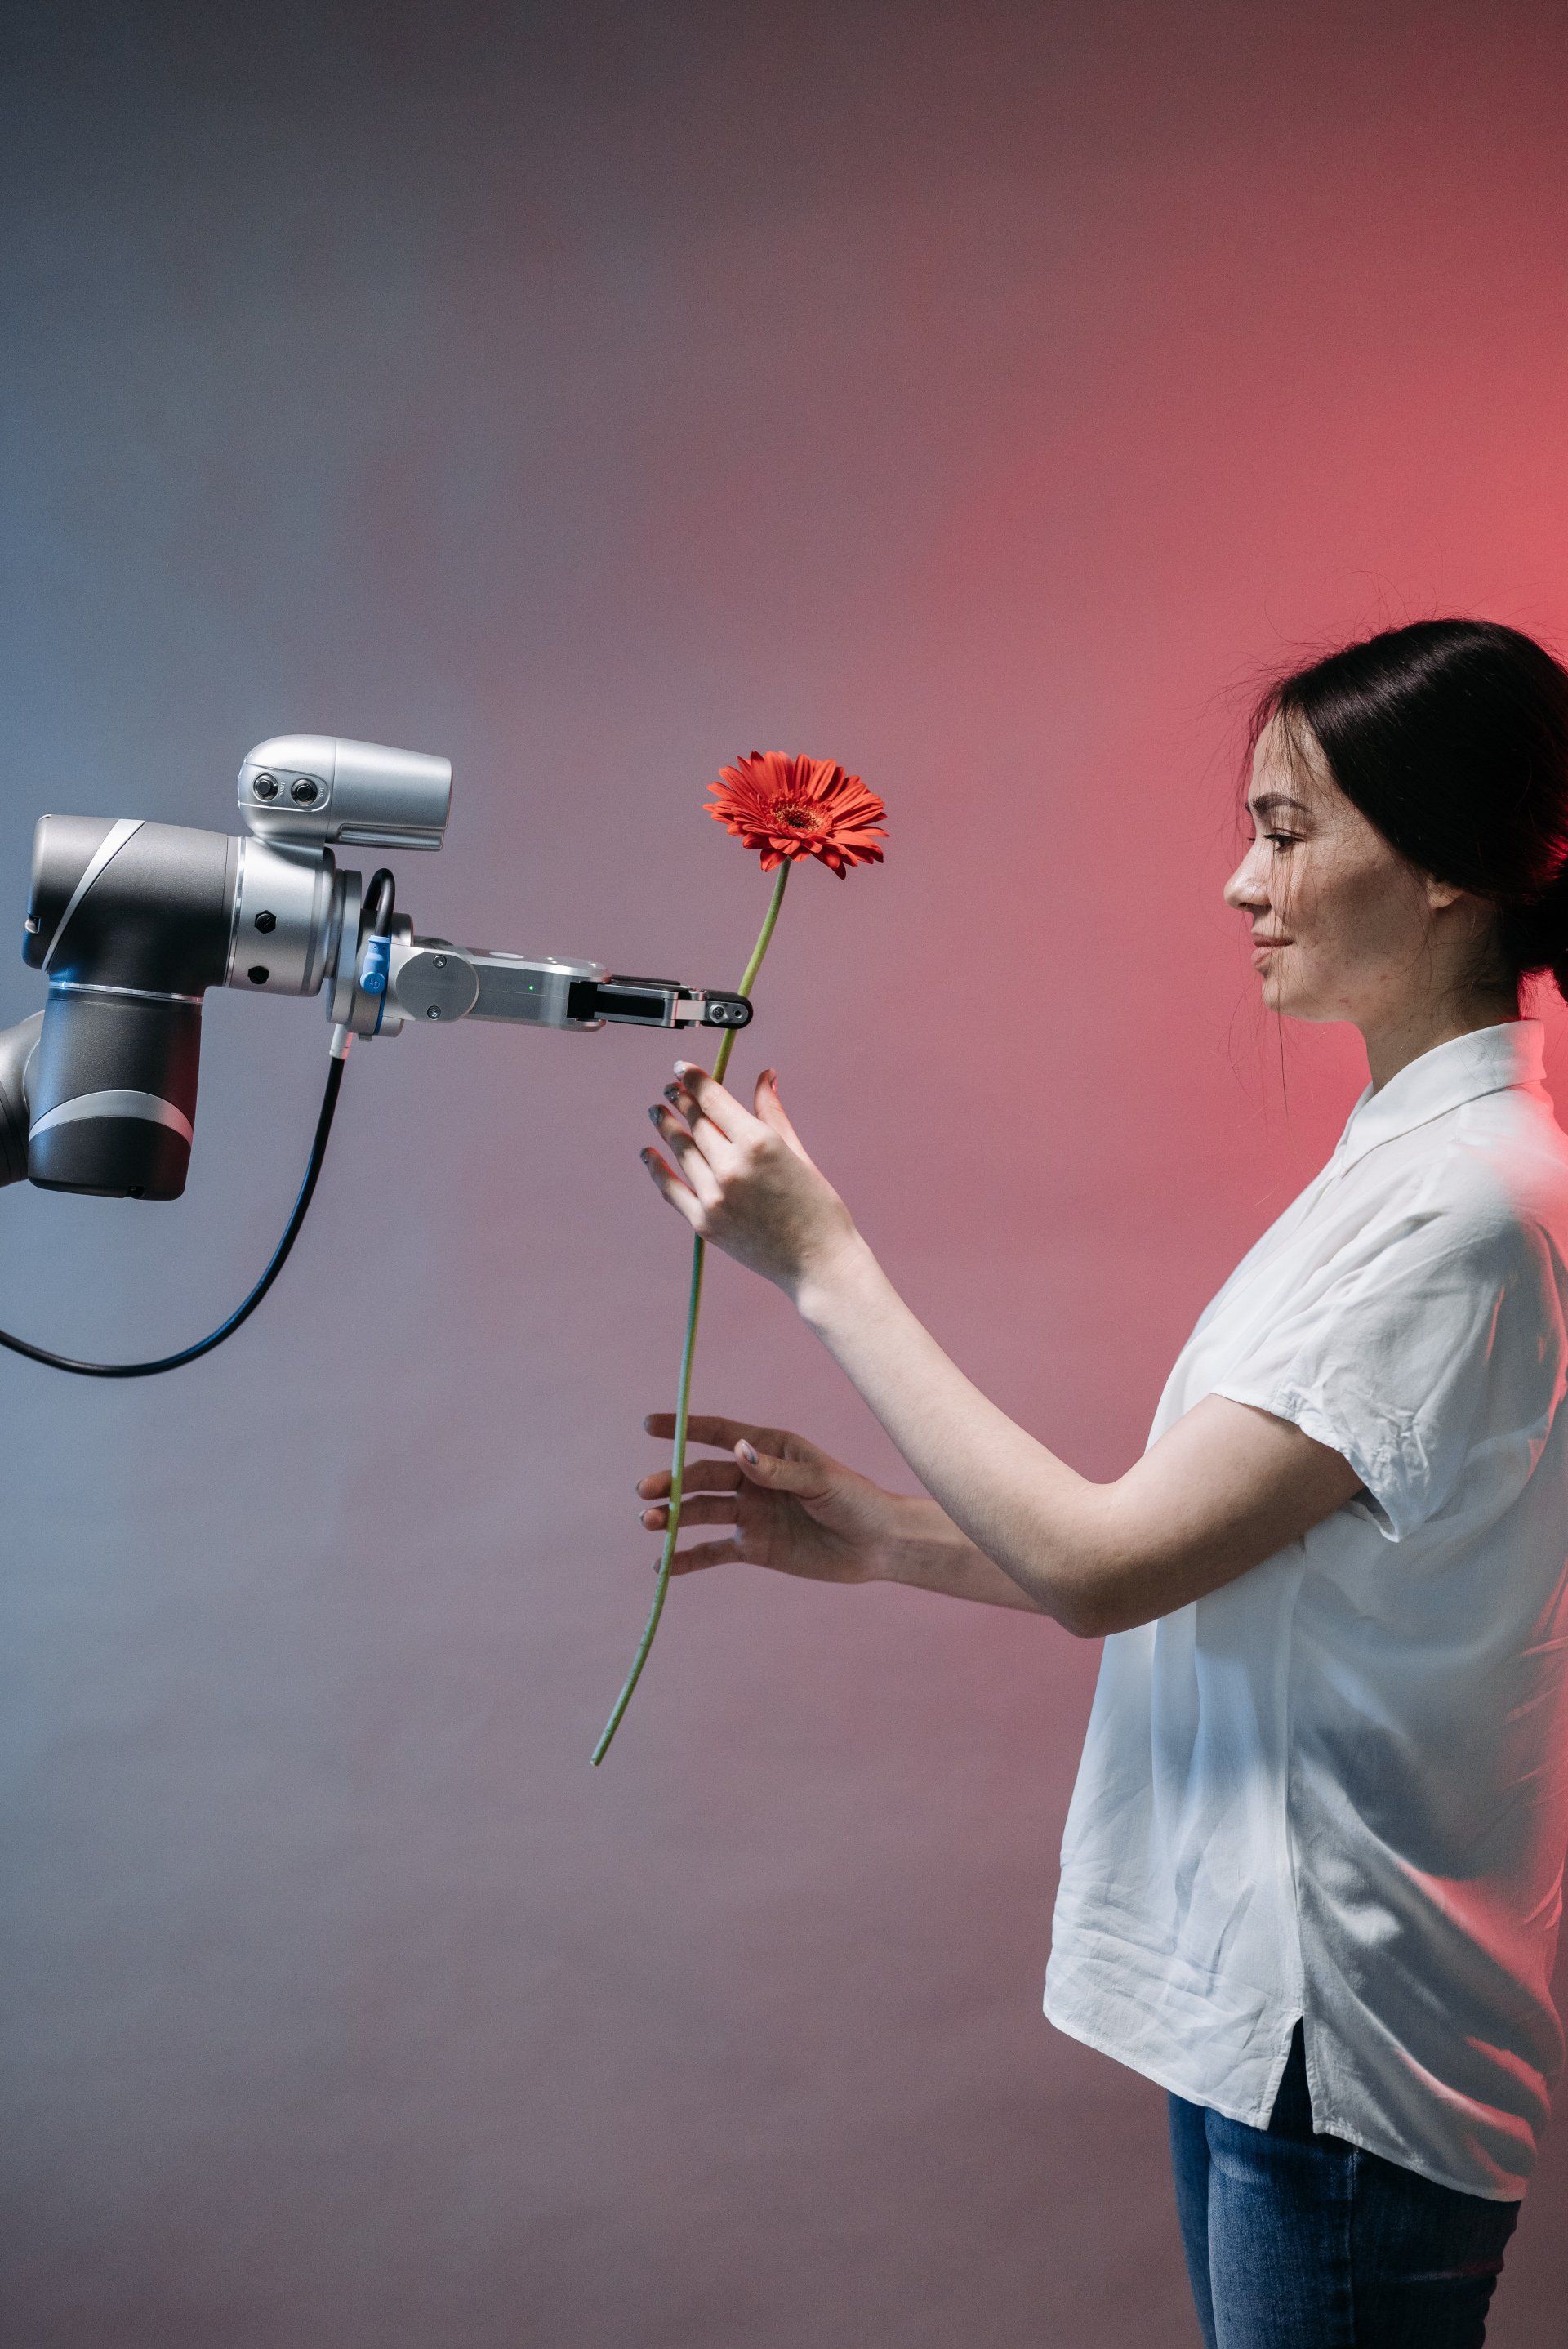 Image of a woman accepting a flower from an AI robot